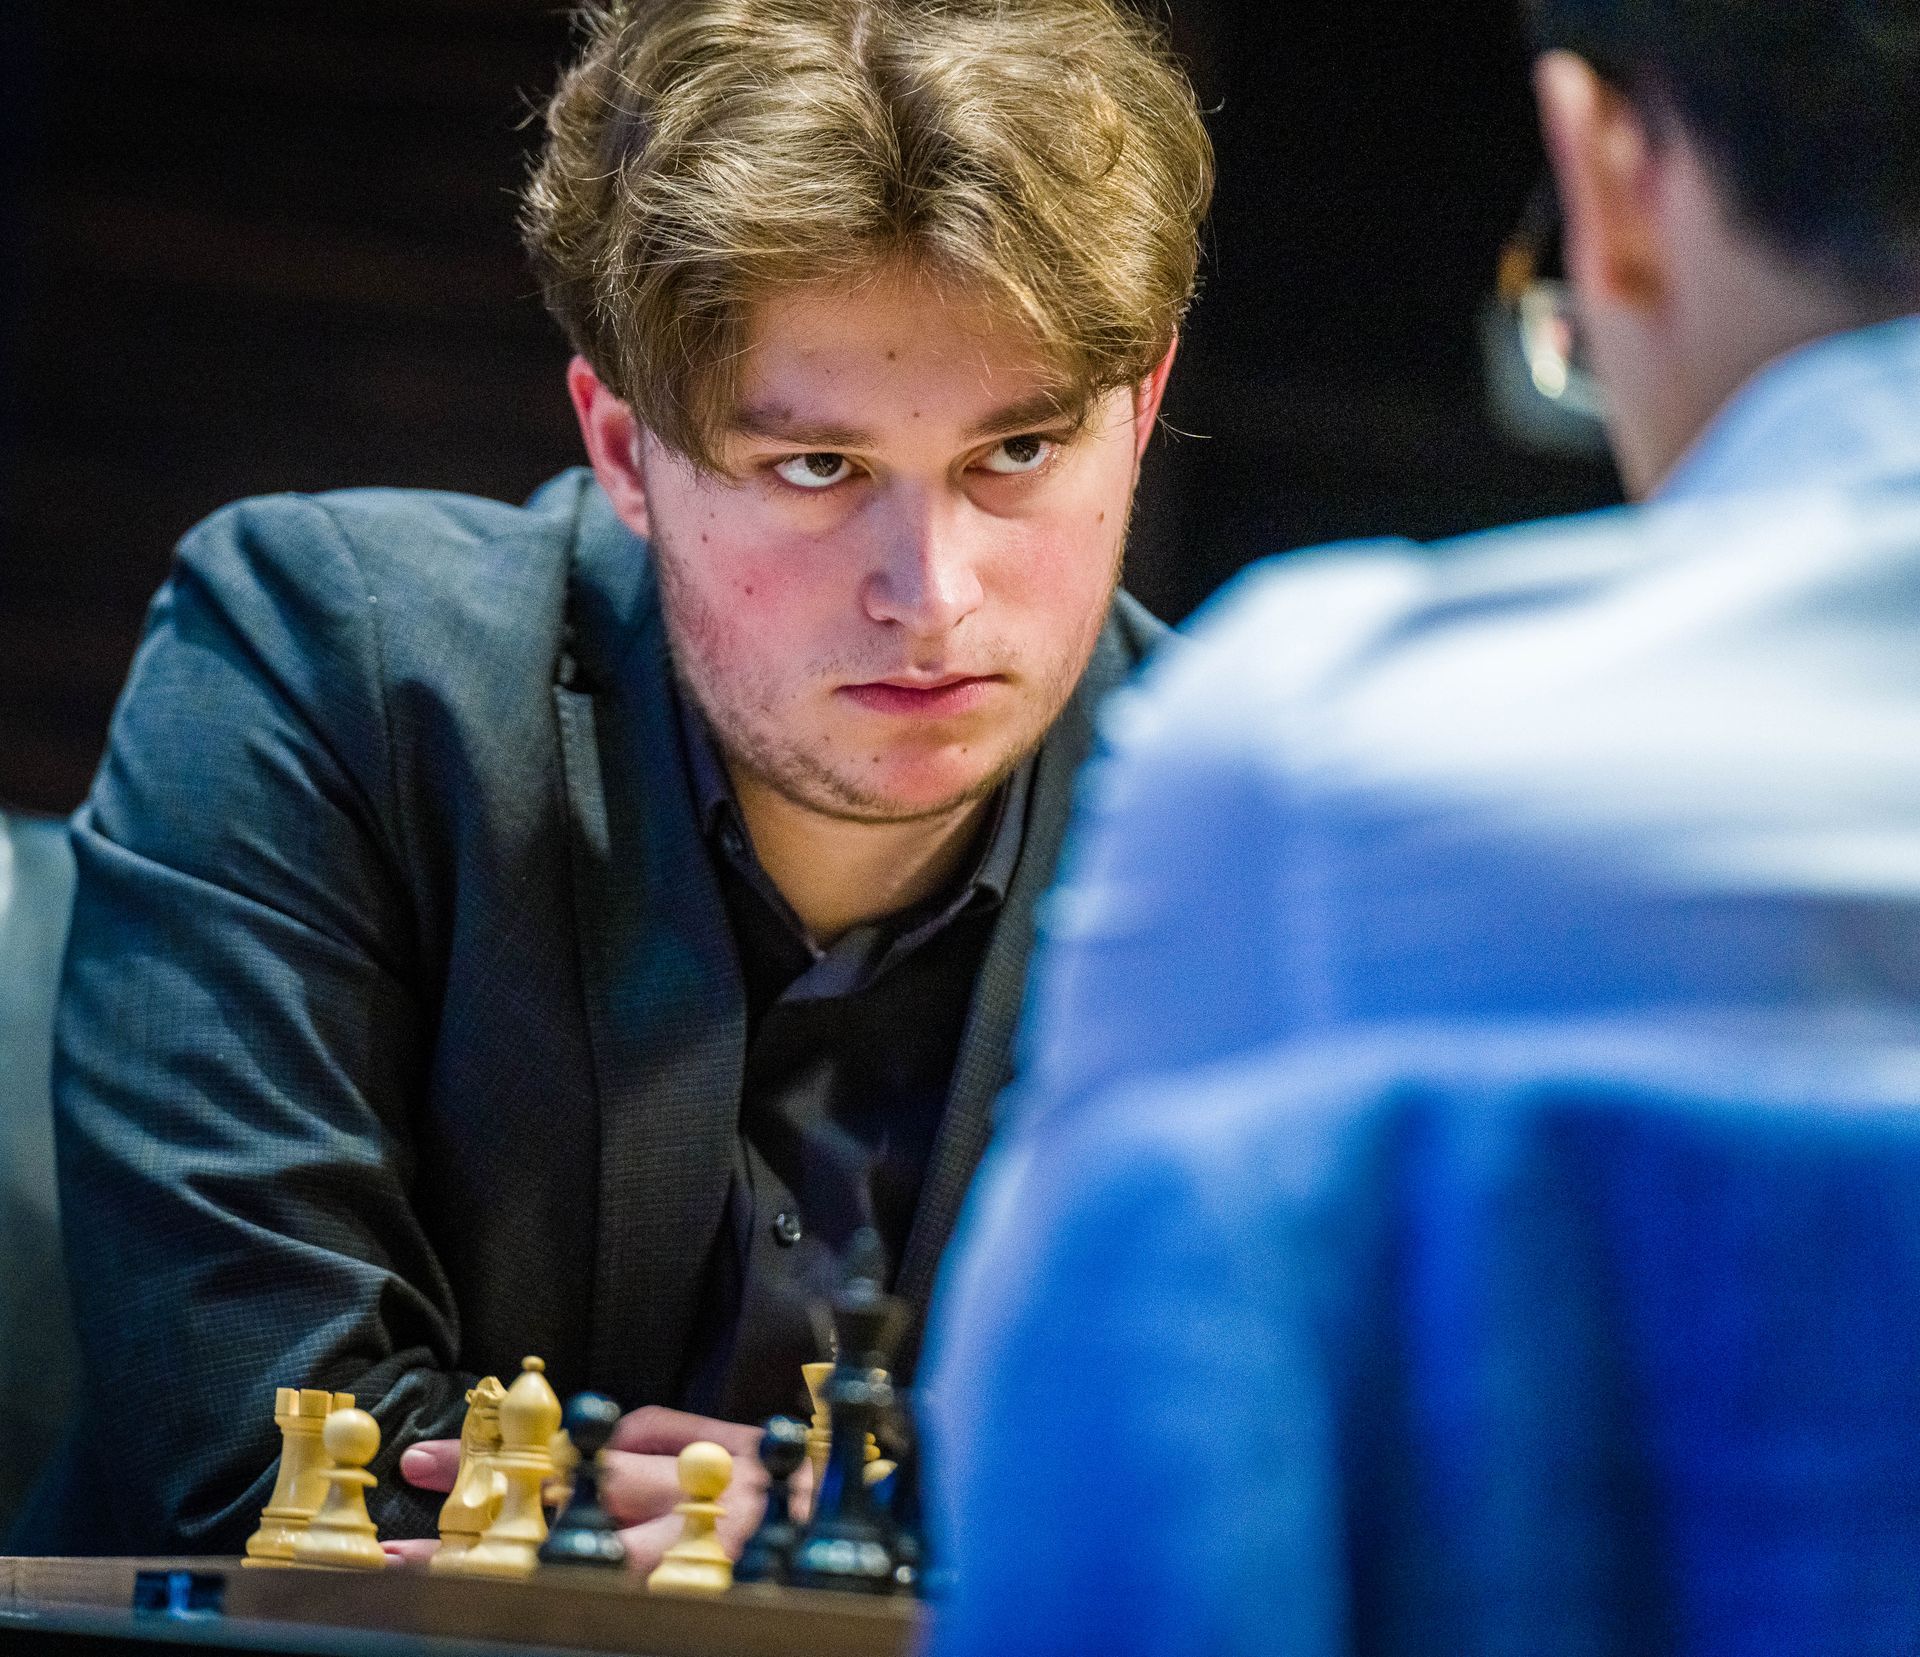 Nepomniachtchi Declines Draw, Topples Leader; Gukesh Jumps Into Tie For 1st  